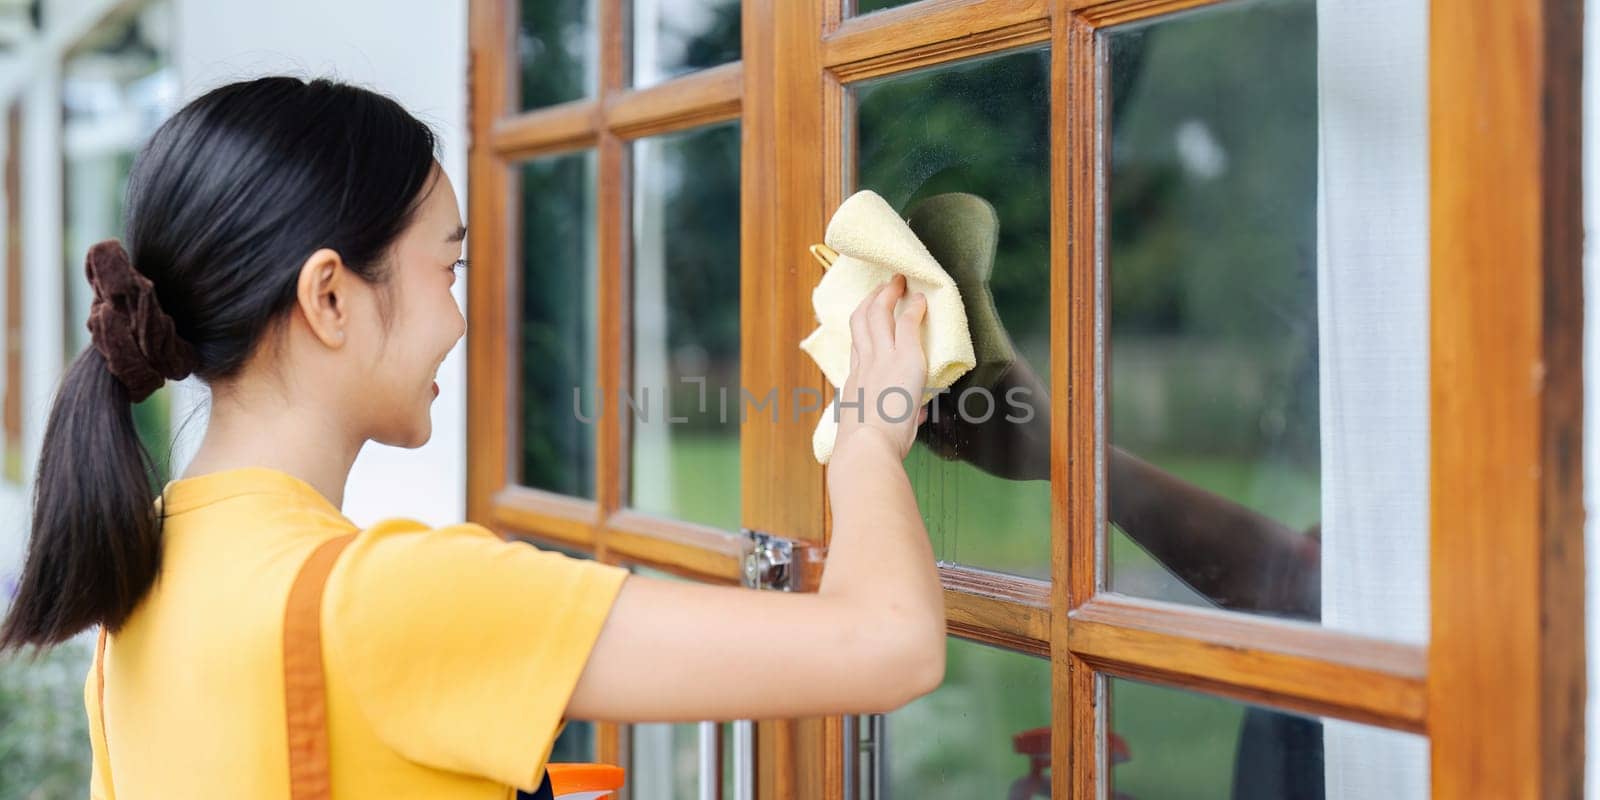 Woman doing household chores and wiping windows in the house on weekends.